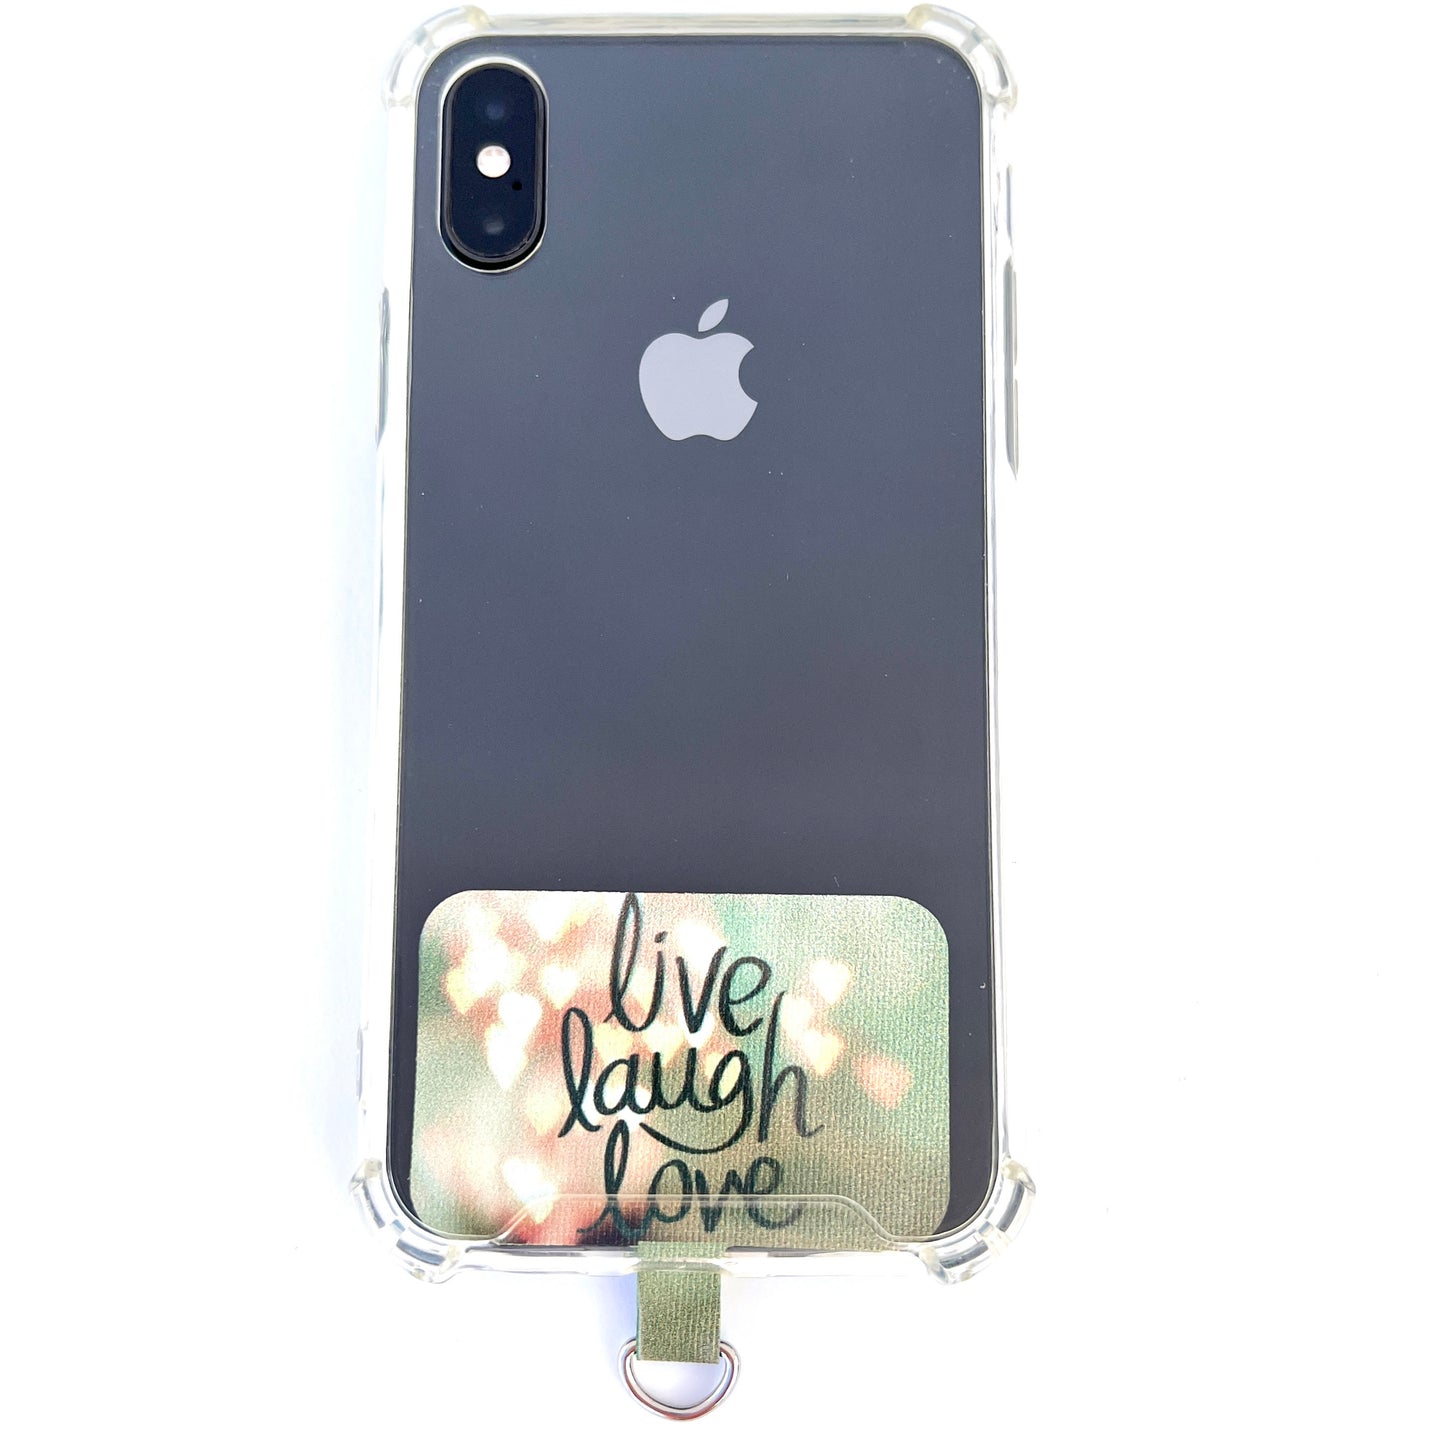 live laugh love Phone Connector Patch